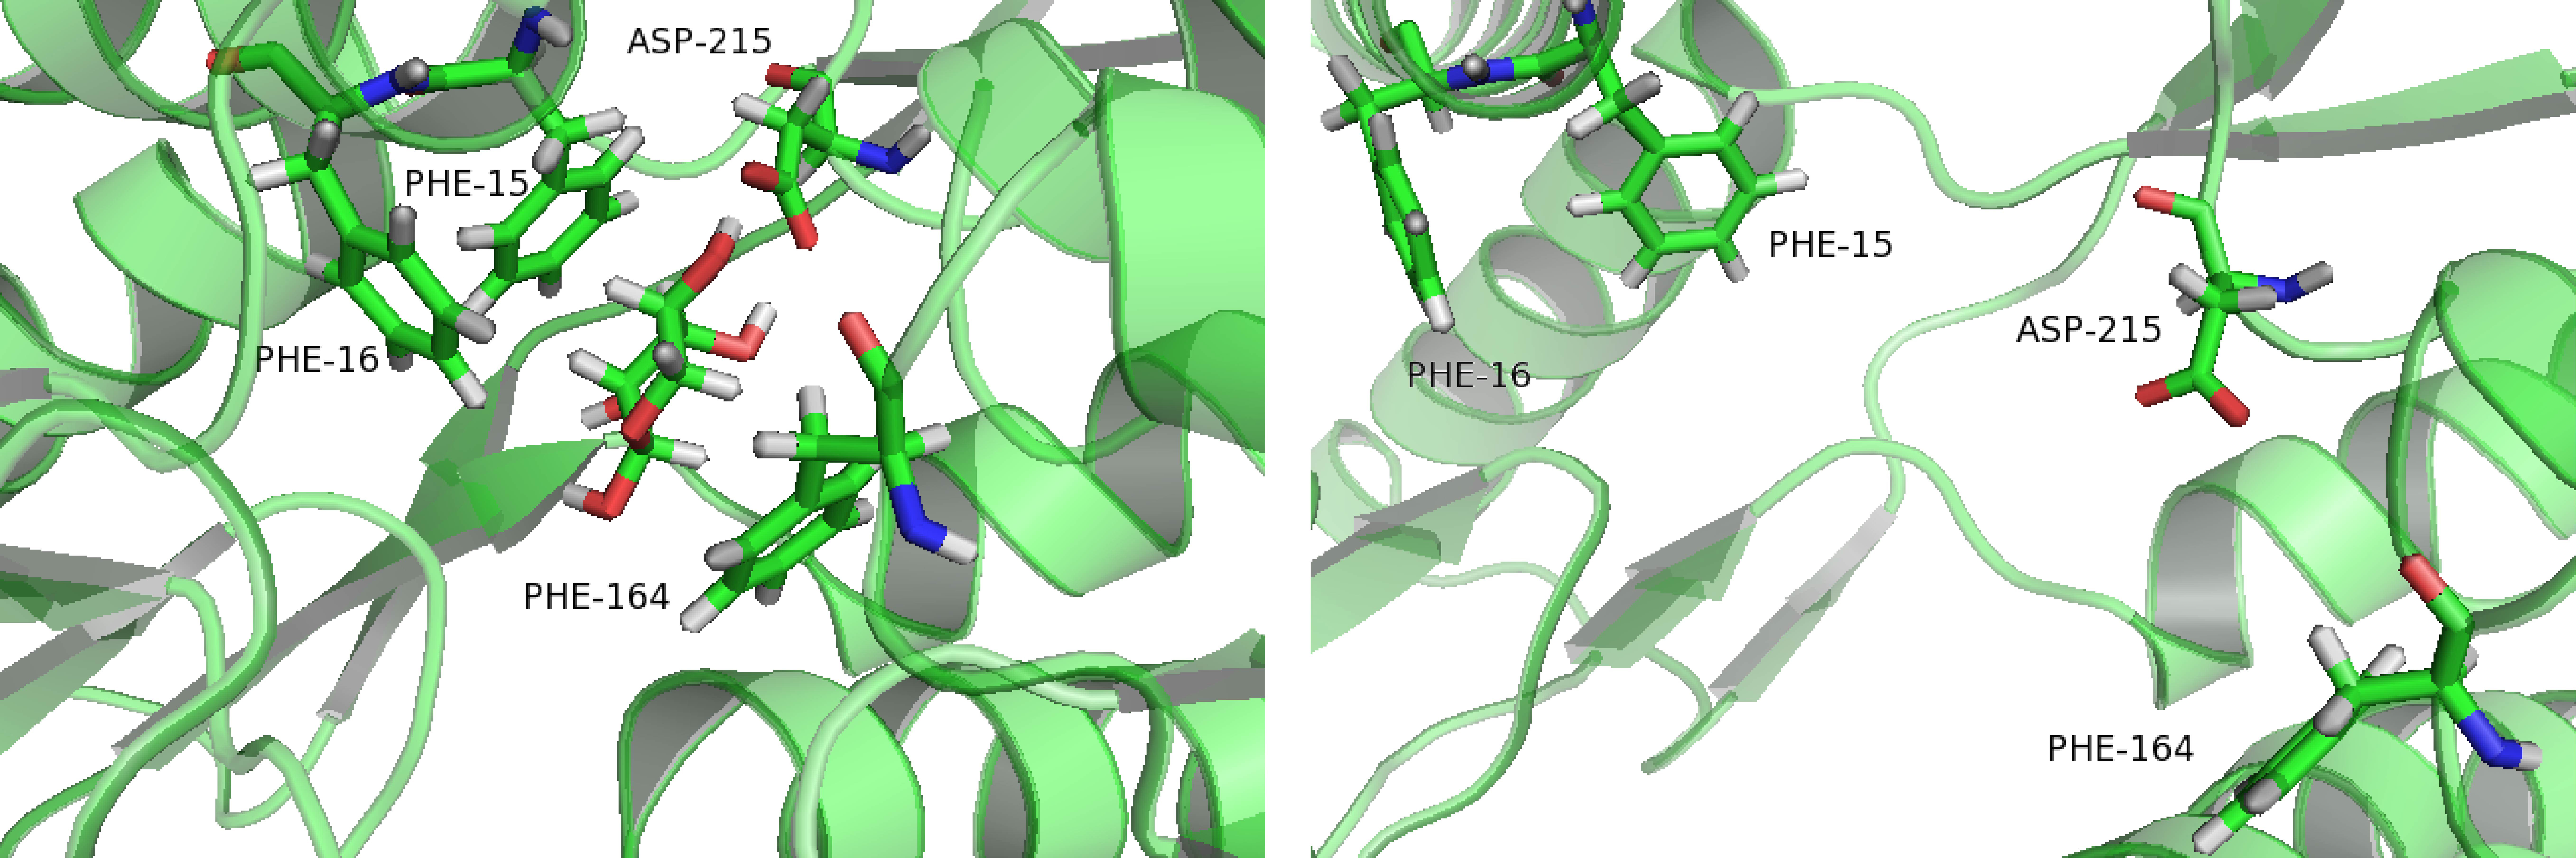 The snapshots are taken from the closed-ligand simulation (left) and closed-apo simulation (right) at 30 ns.